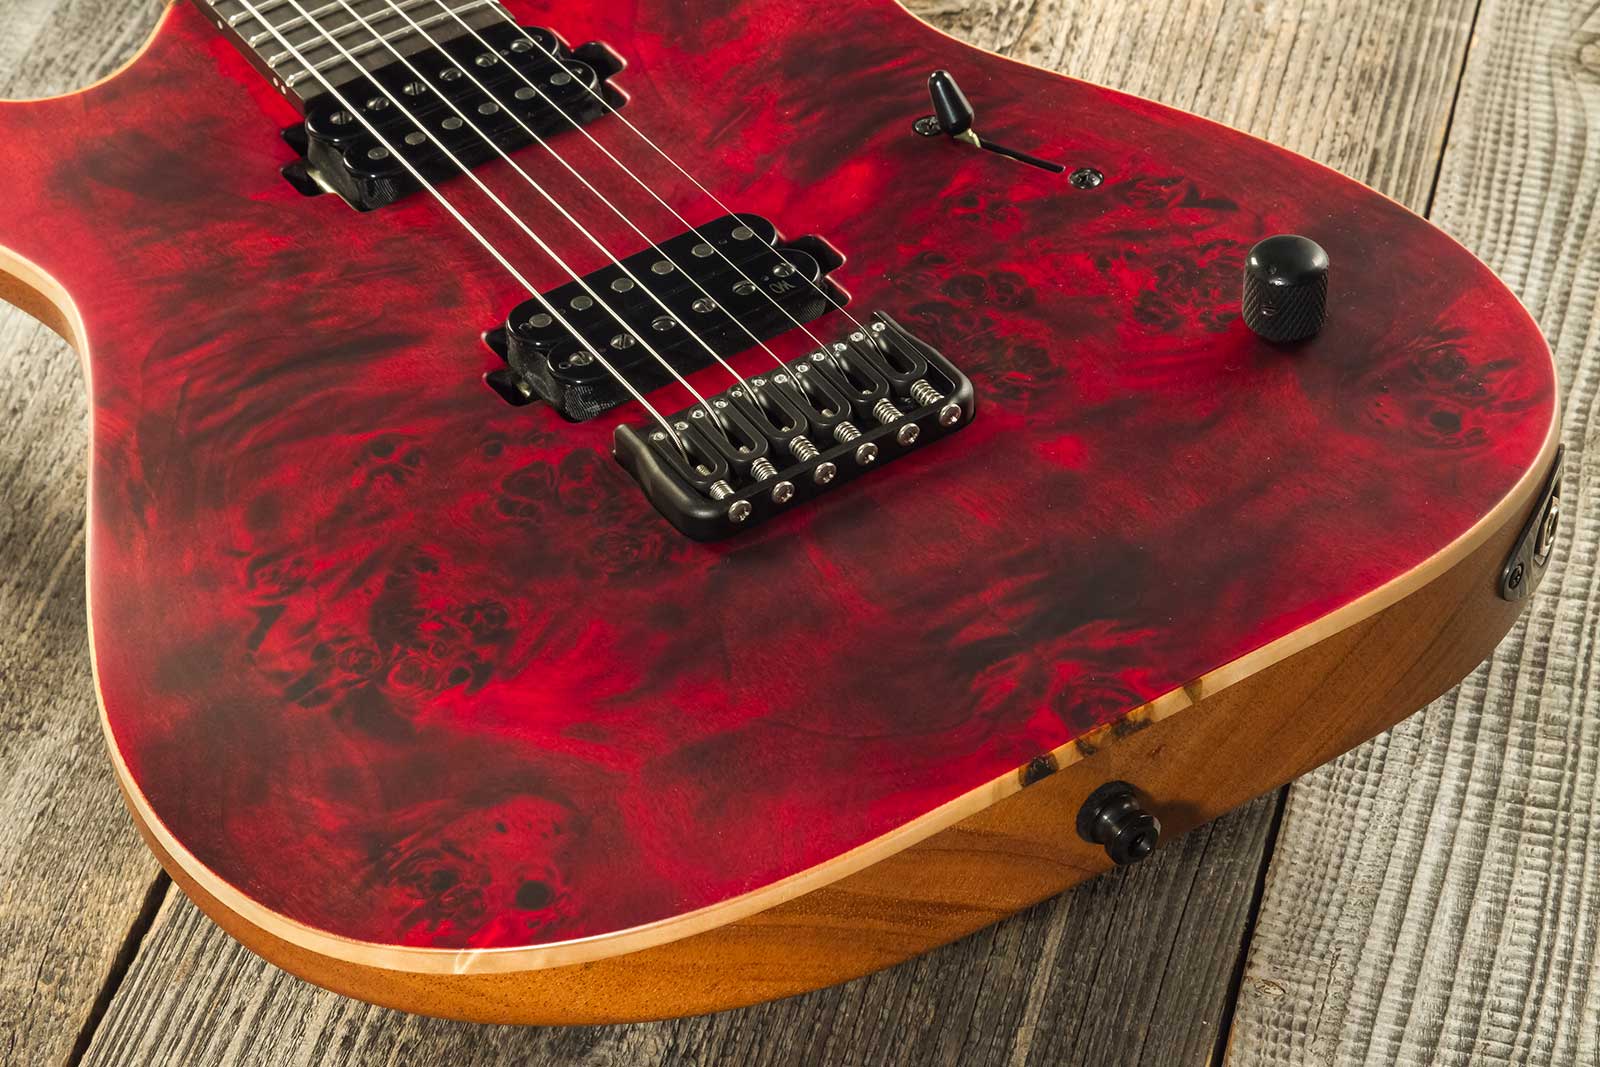 Mayones Guitars Duvell Elite 6 2h Bare Knuckle Ht Eb #df2301294 - Trans Dirty Red Satine - Guitarra electrica metalica - Variation 3